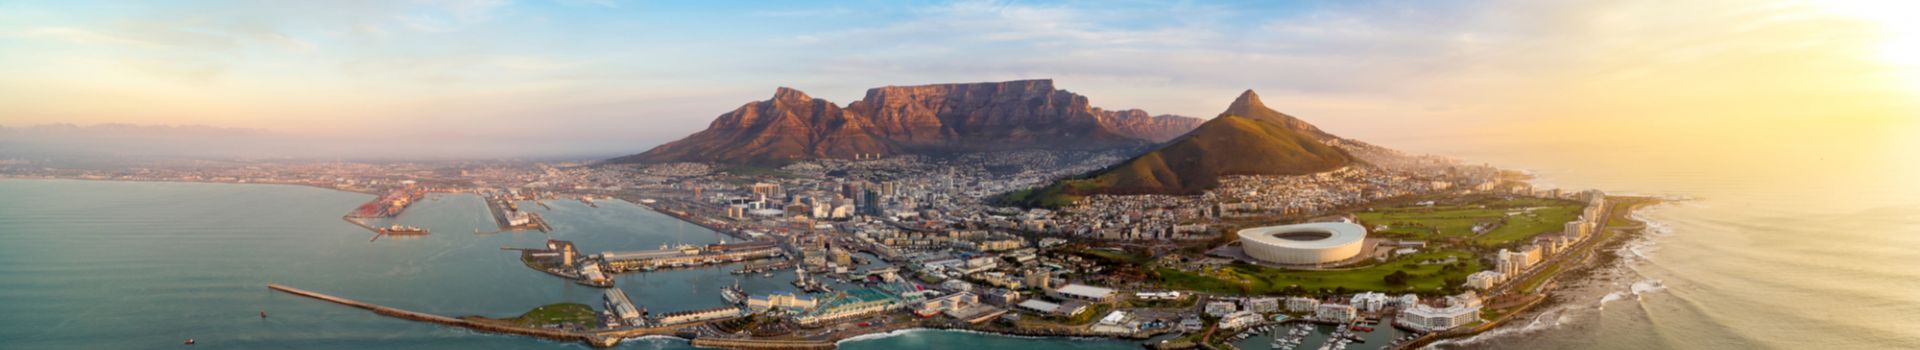 Country Destination Page - Holidays to South Africa - Cassidy Travel